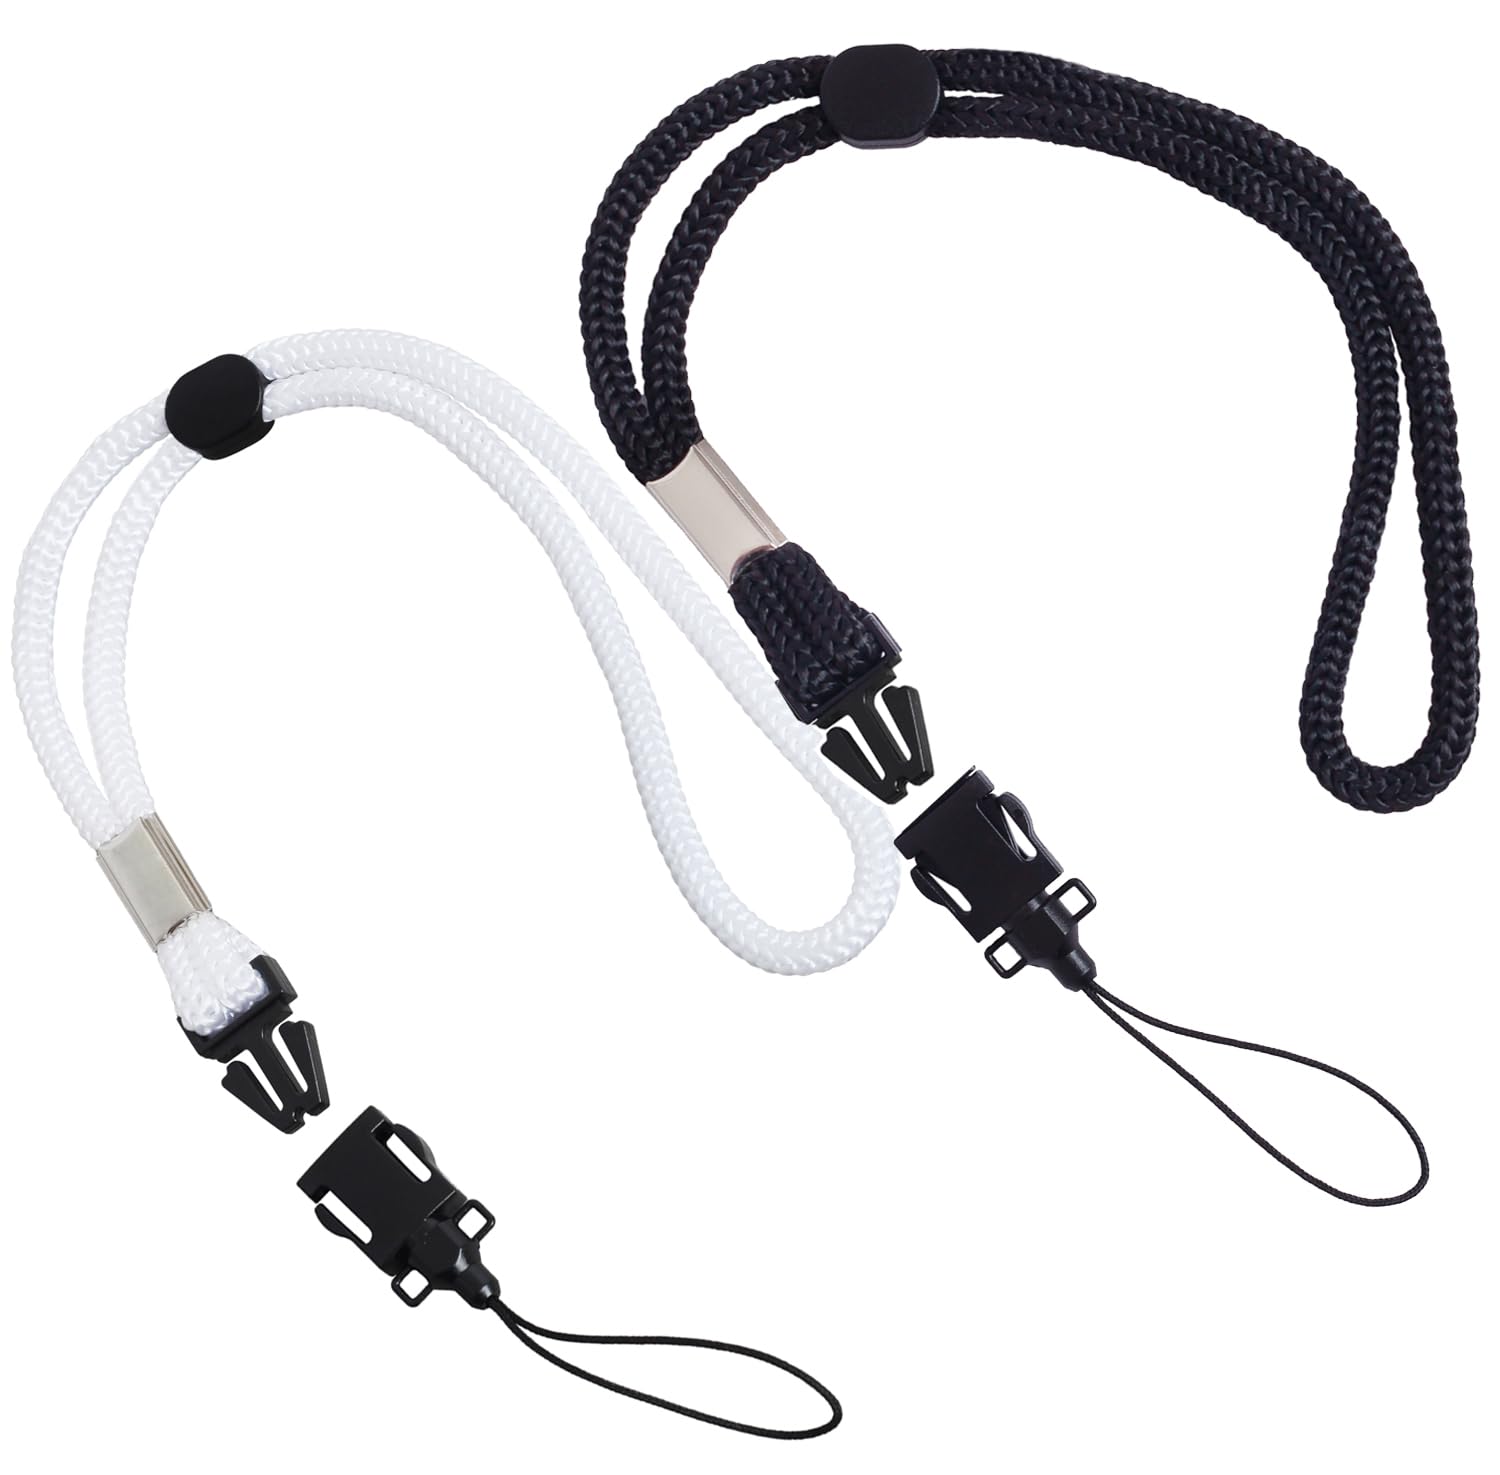 Digital Nc 2 Pack Camera & Cell Phone Wrist Strap (Lanyard Style) Adjustable with Quick-Release. (Black & White Set)